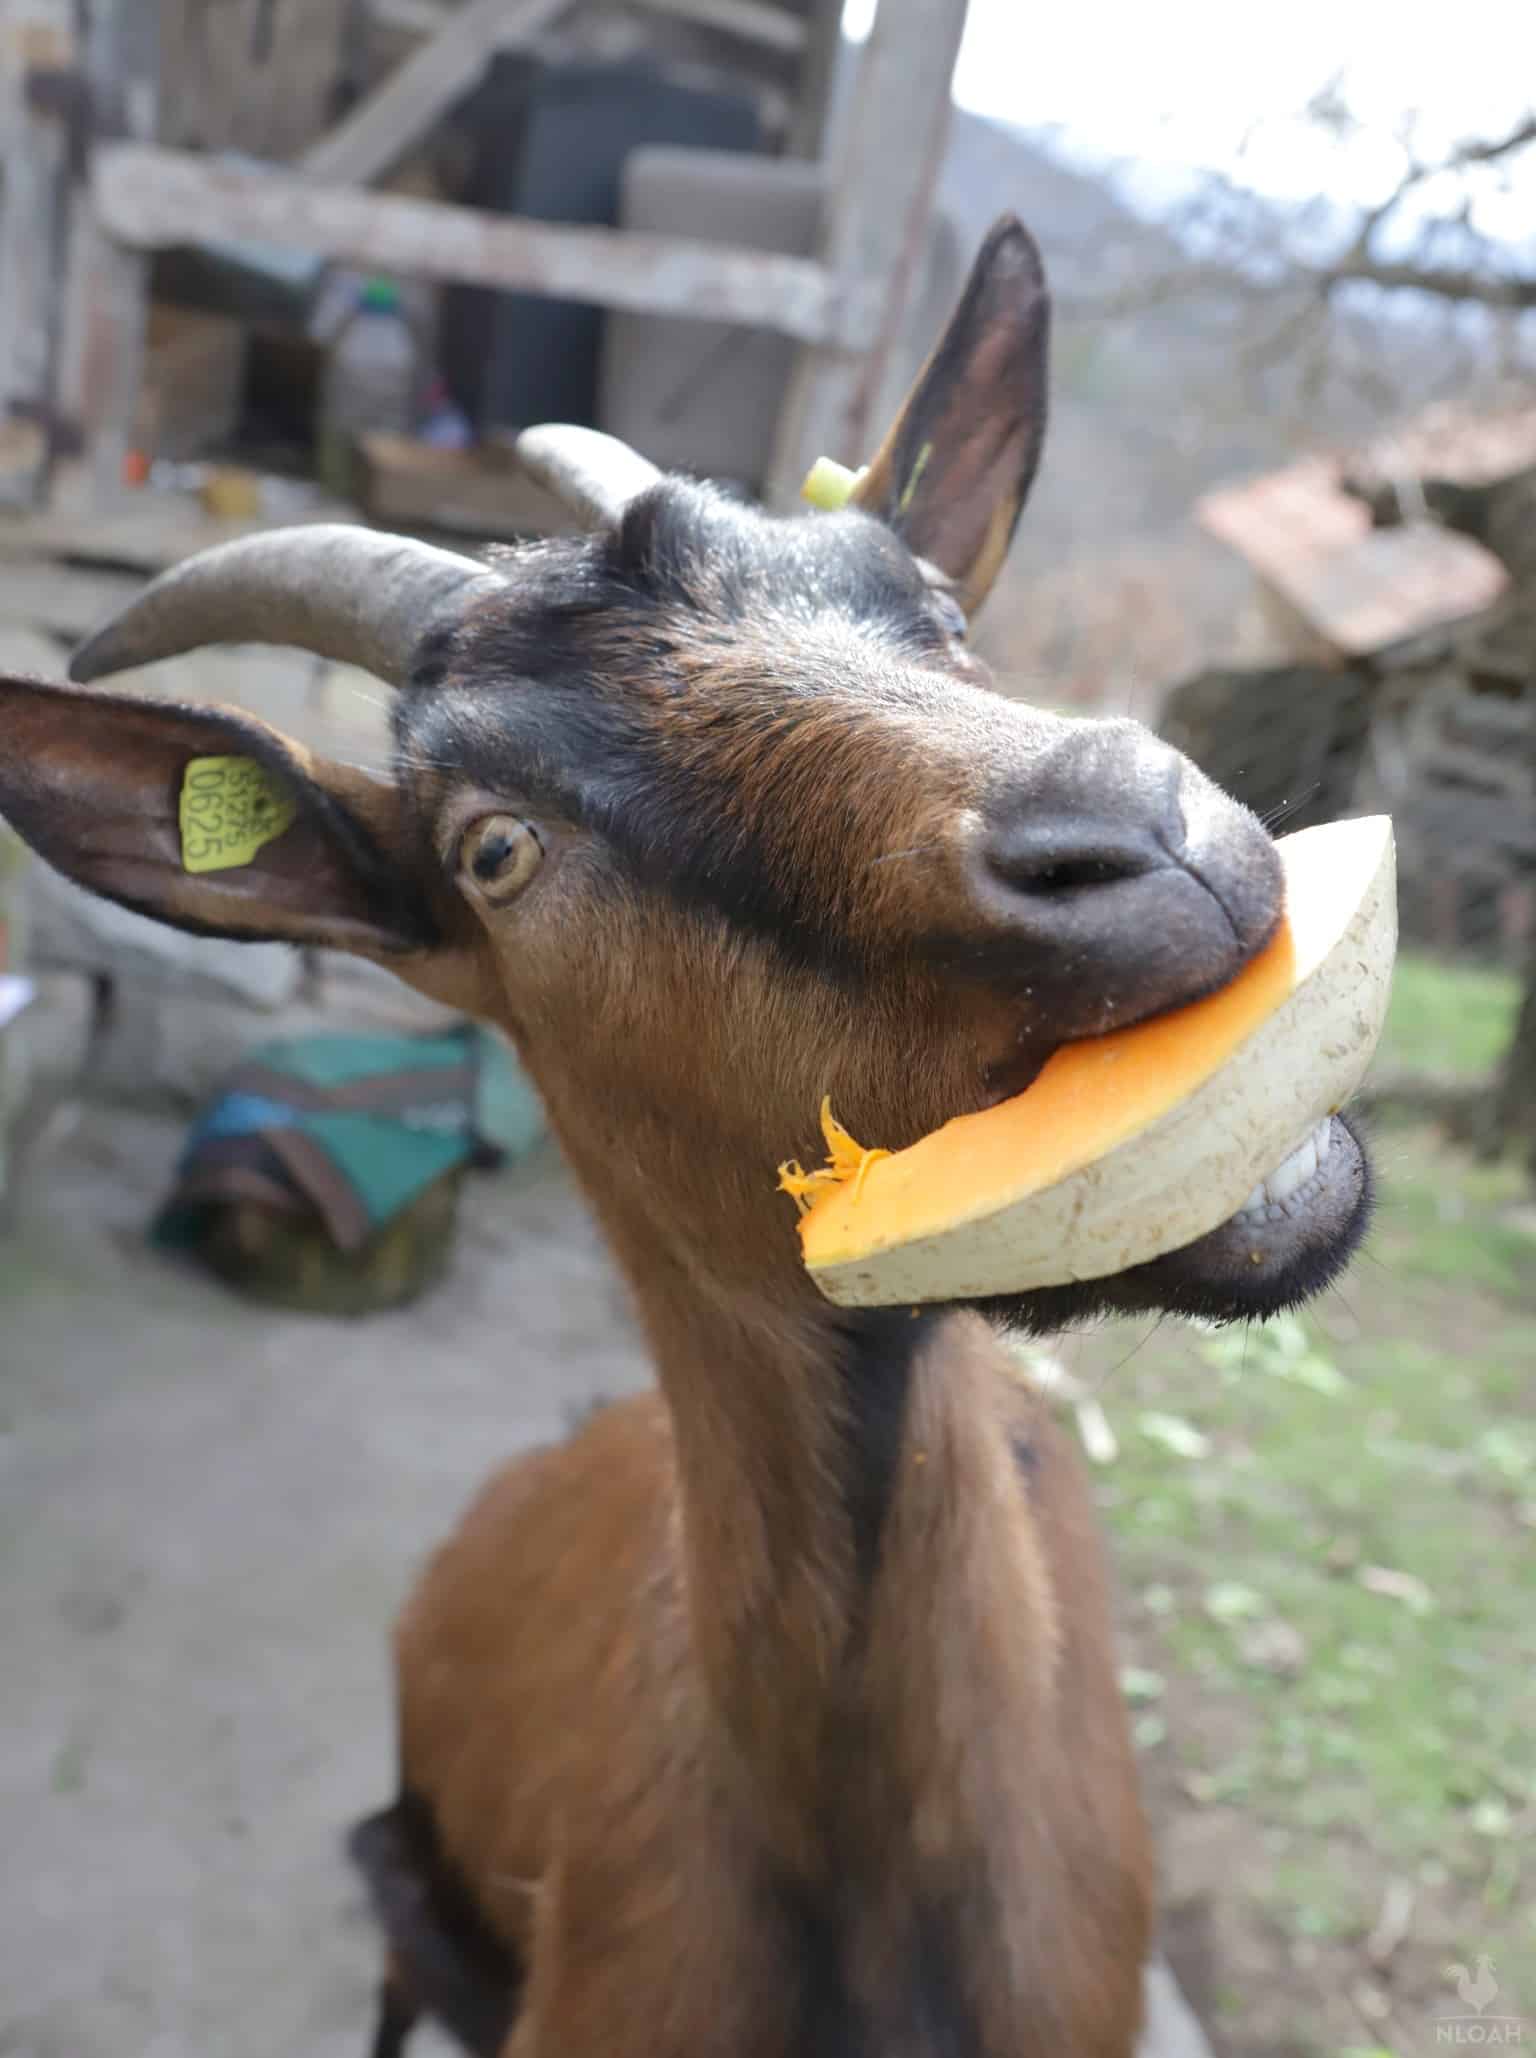 goat trying to eat a pumpkin slice